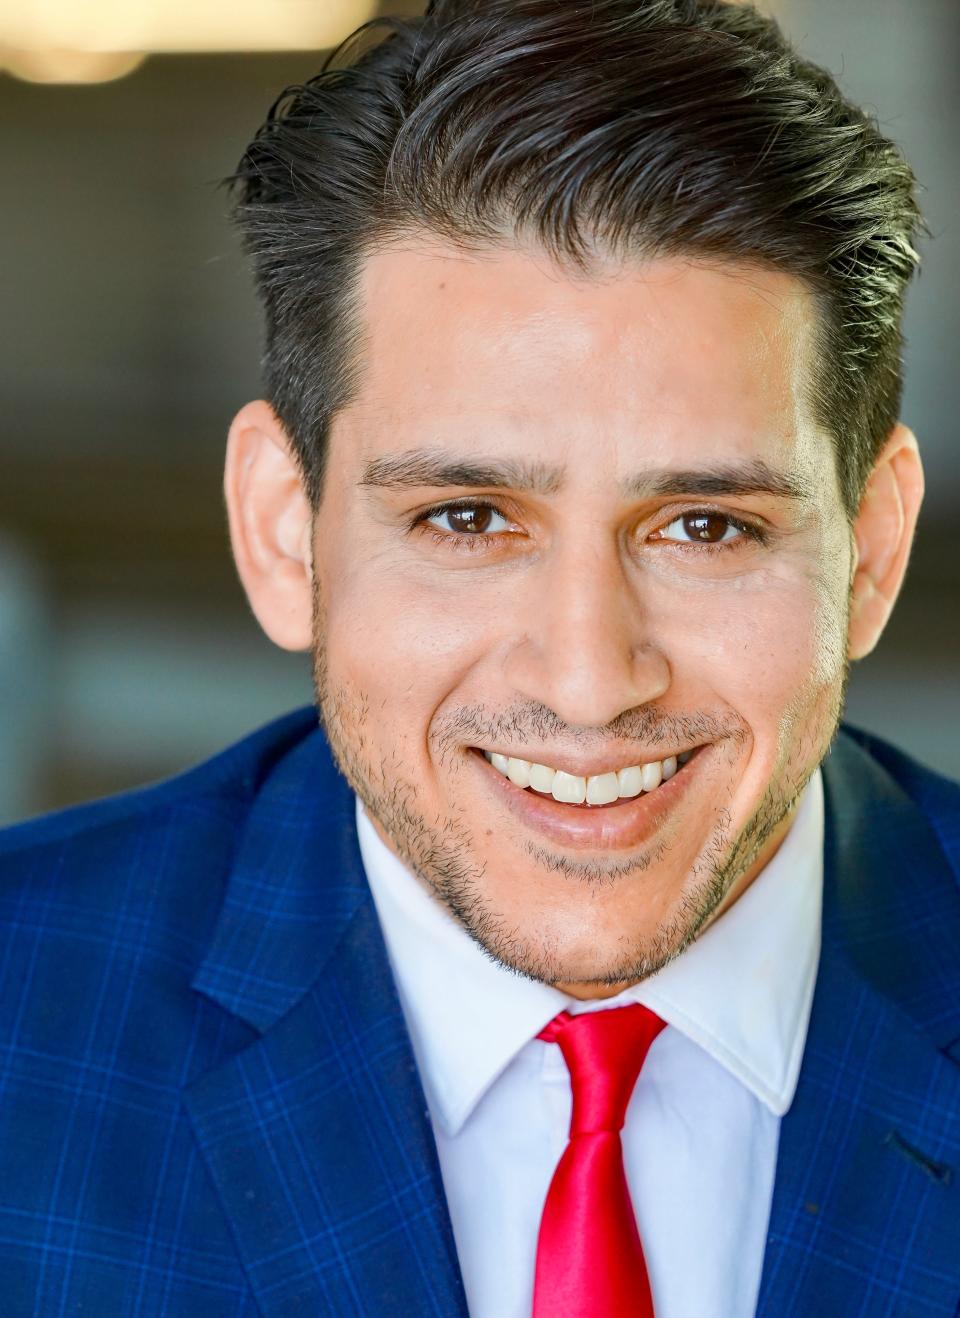 Tarek Zohdy of Capstone Law in Los Angeles has played a key role in the class-action settlement between Ford Motor Co. and nearly 2 million Ford Focus and Fiesta owners. This photo was taken March 24, 2019.